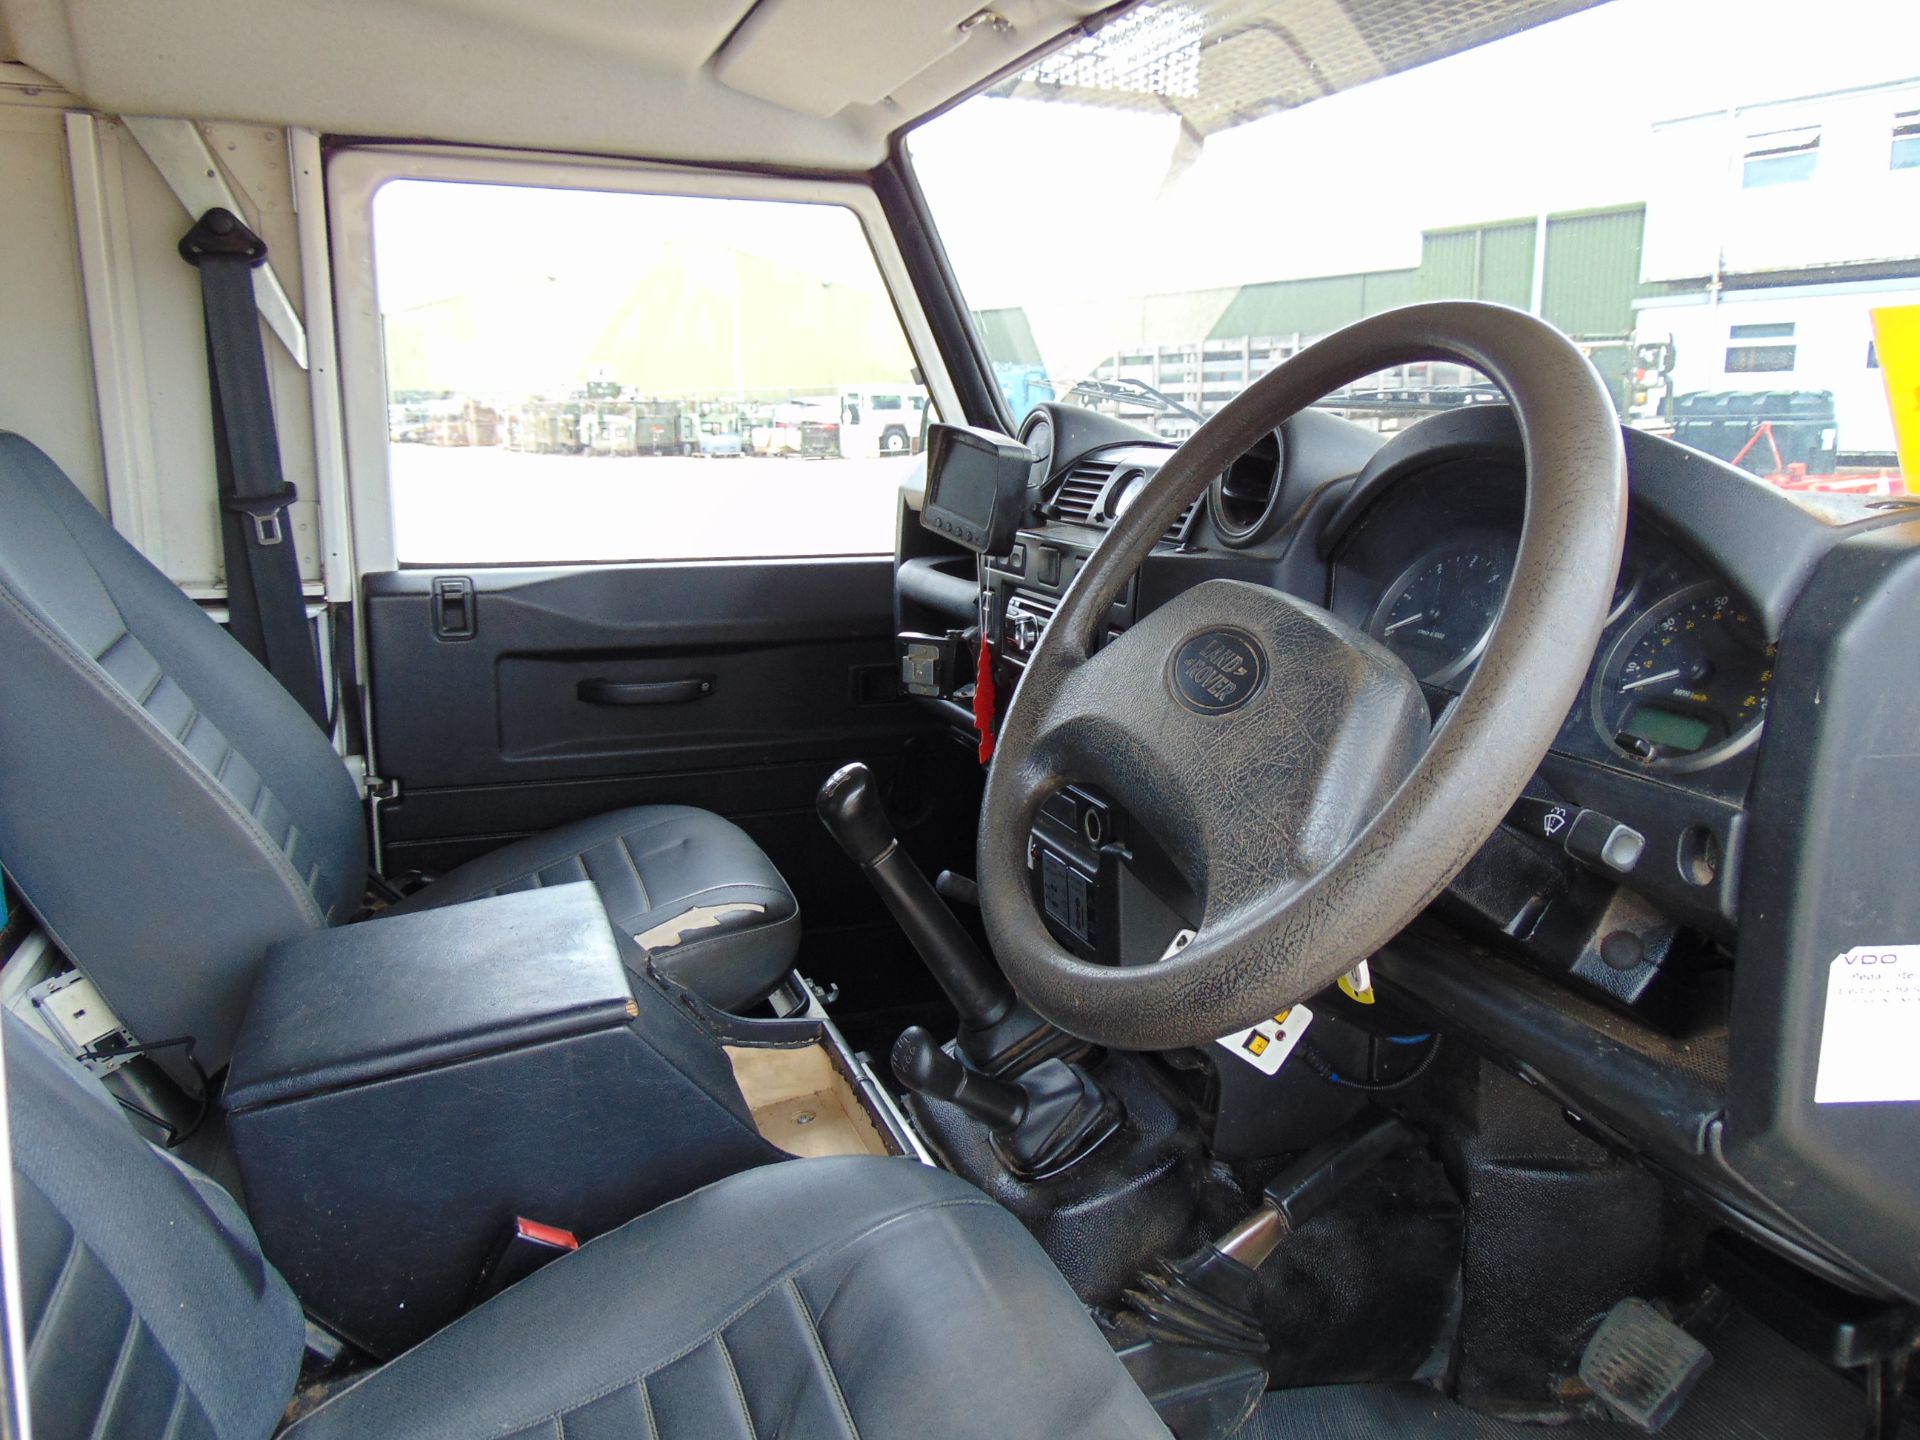 Land Rover Defender 110 Puma Hardtop 4x4 Special Utility (Mobile Workshop) complete with Winch - Image 12 of 26